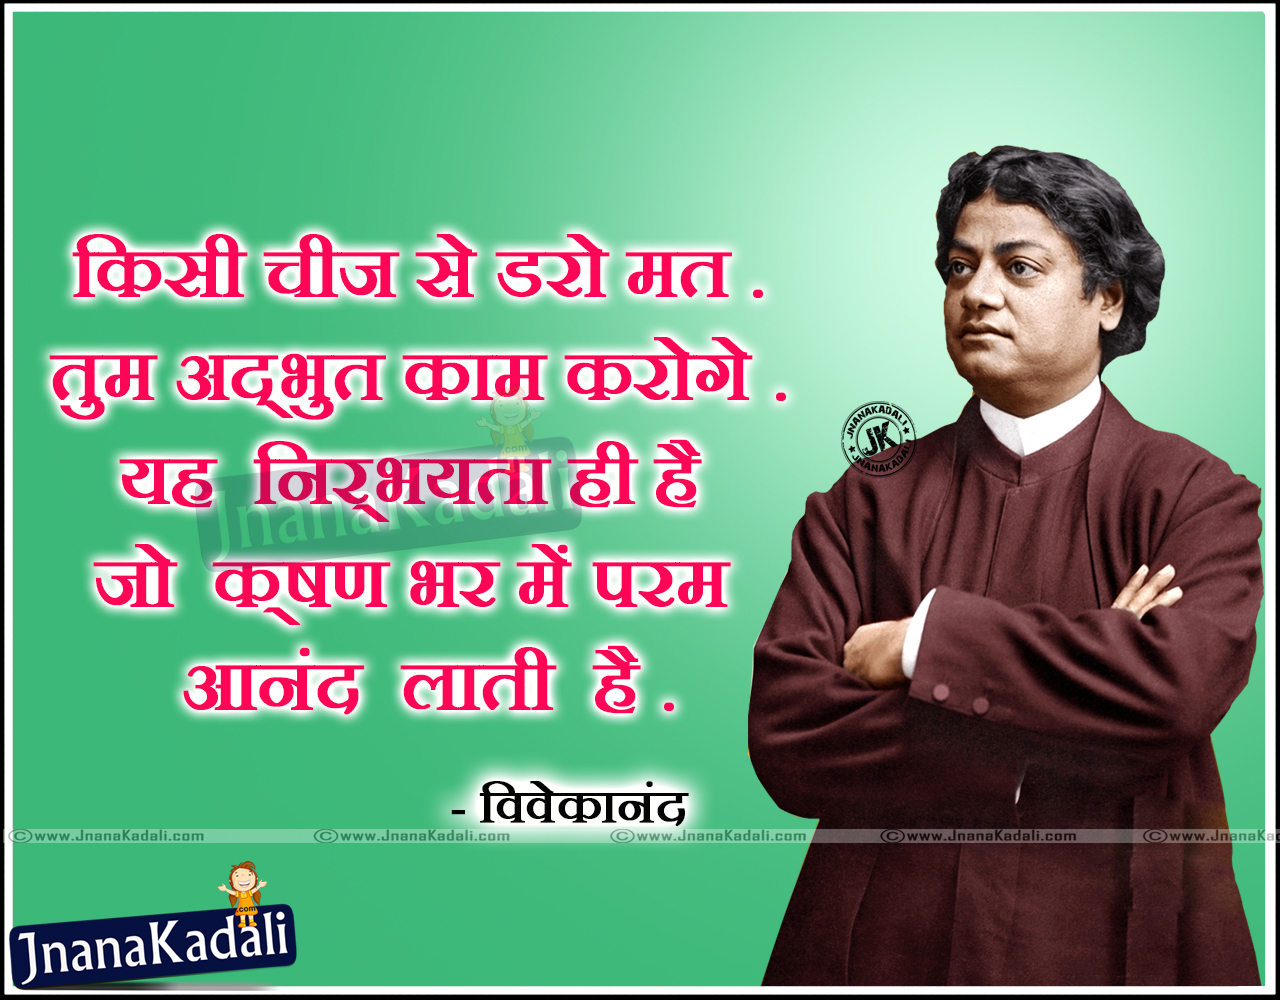 Pictures Of Self Confidence Quotes By Swami Vivekananda Kidskunst Info